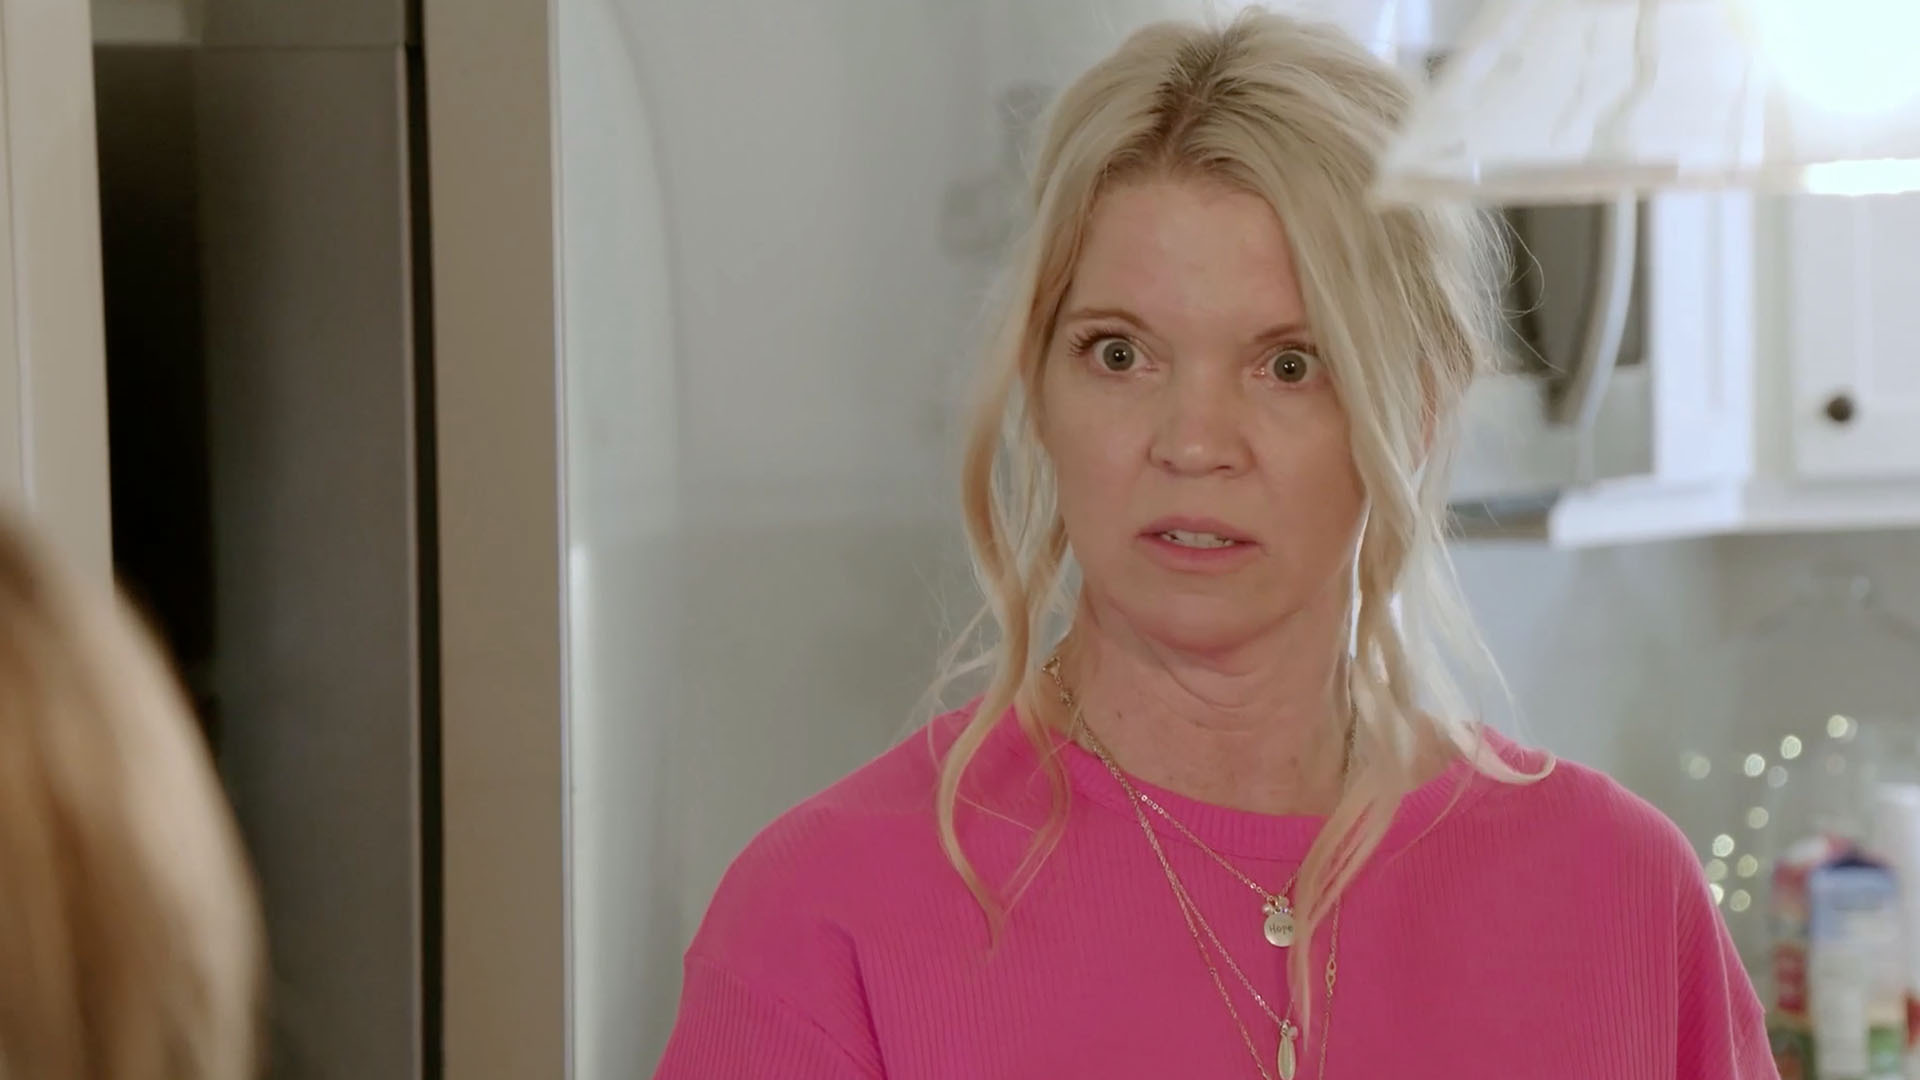 Watch Skylar's Mom Doesn't Approve of Nathan! | Love After Lockup Video Extras